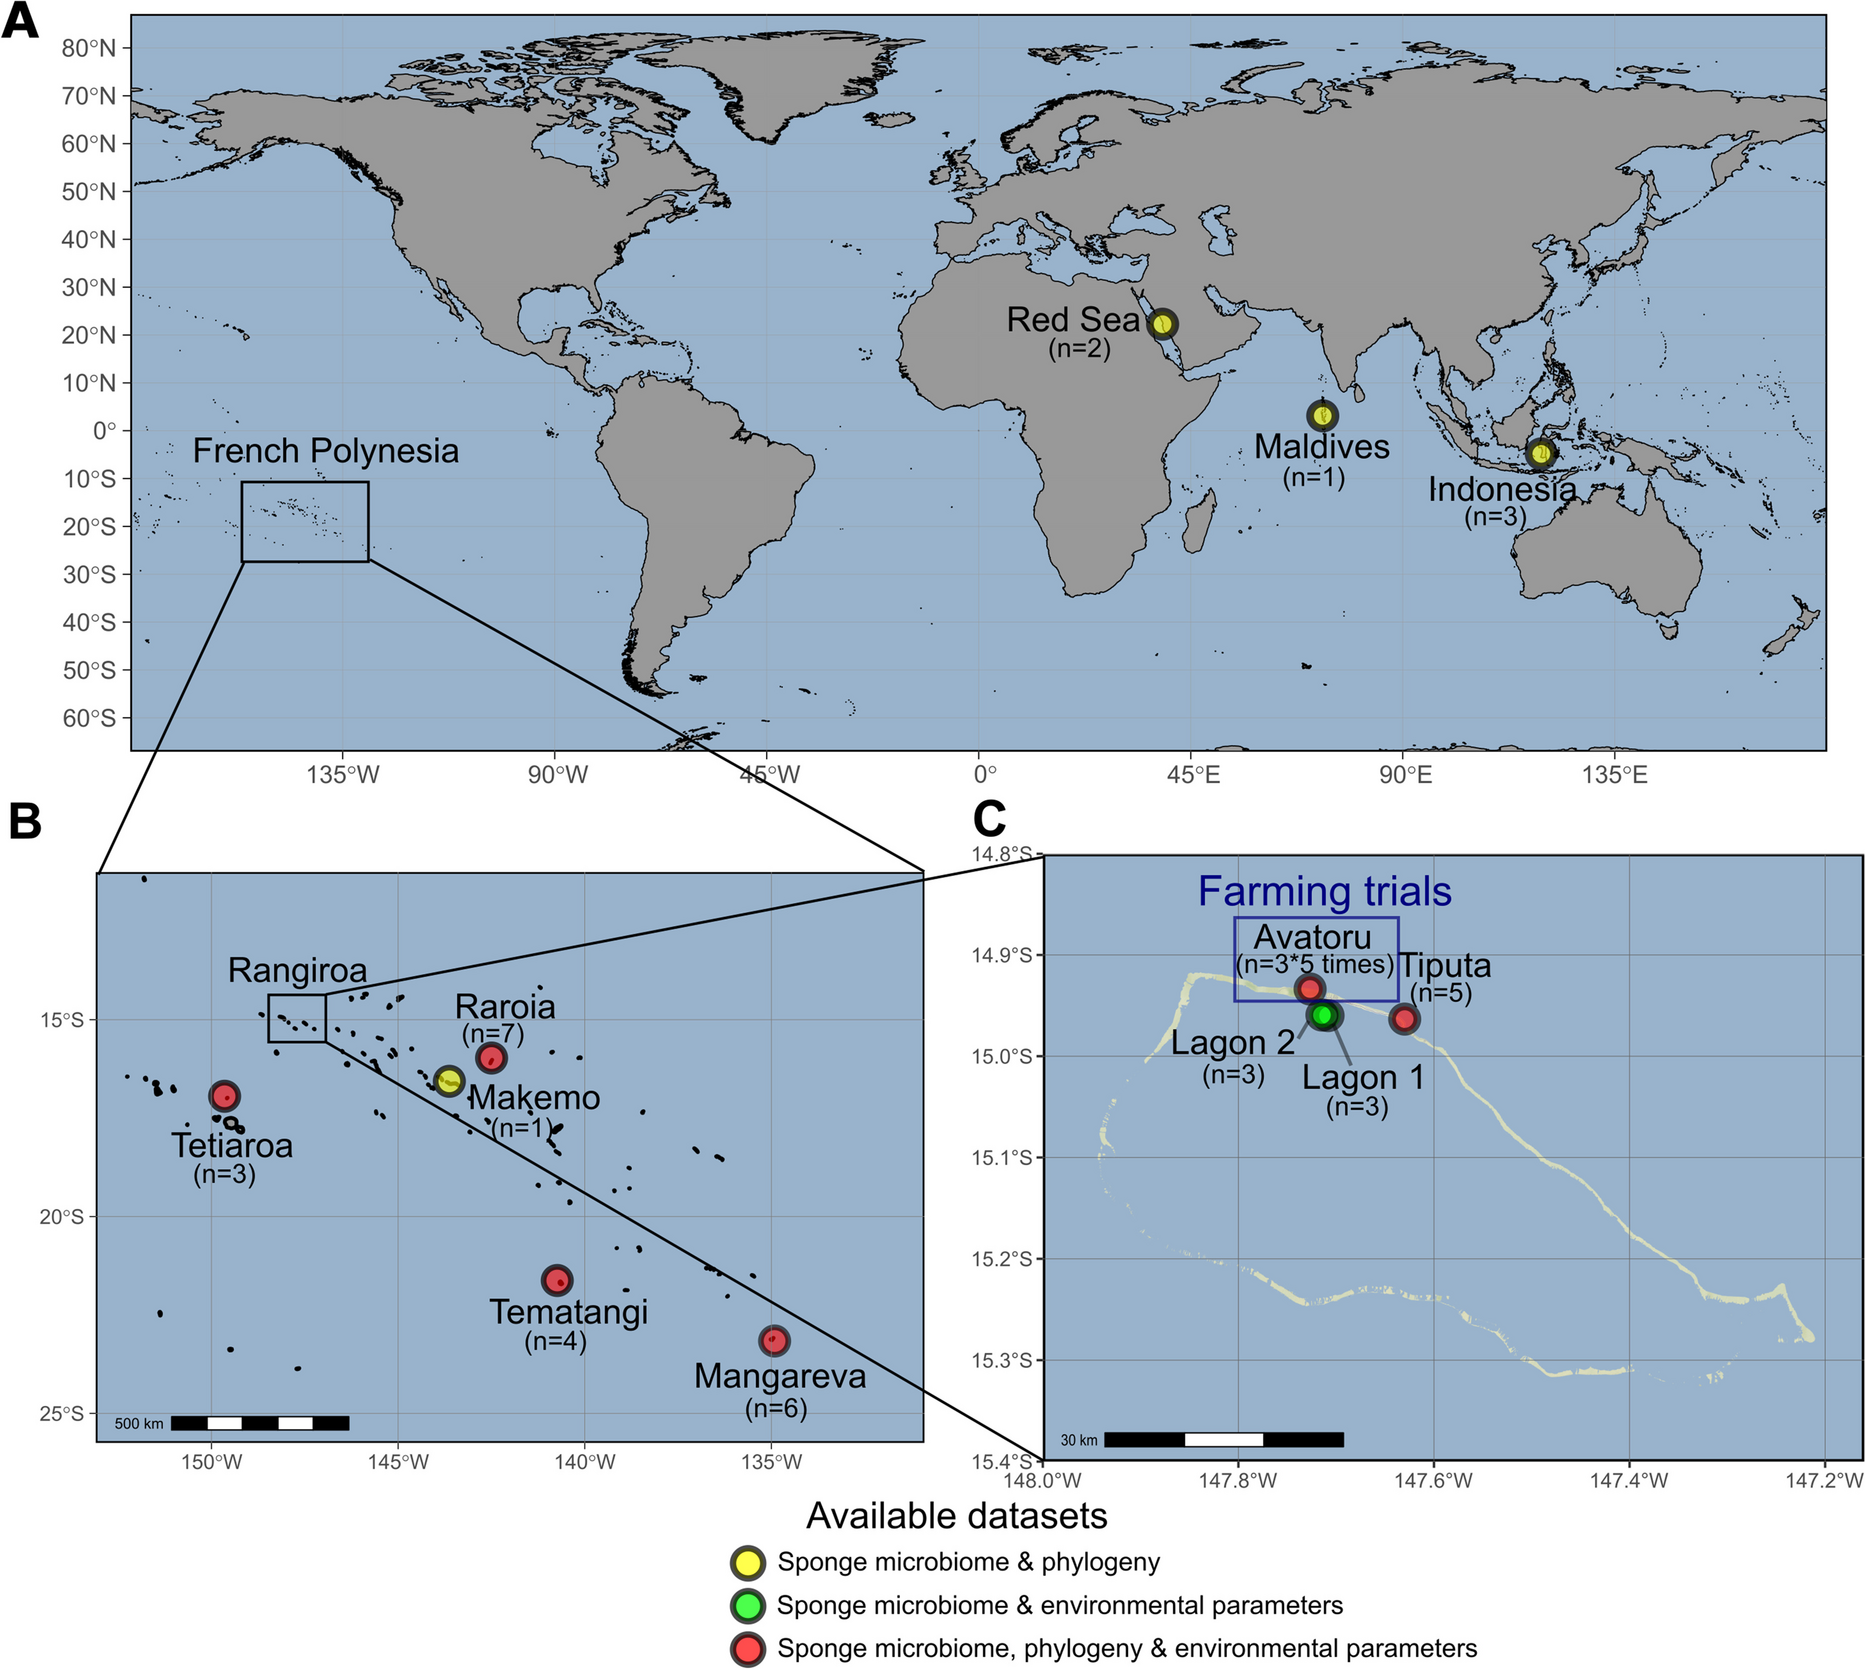 Prokaryotic communities of the French Polynesian sponge Dactylospongia metachromia display a site-specific and stable diversity during an aquaculture trial